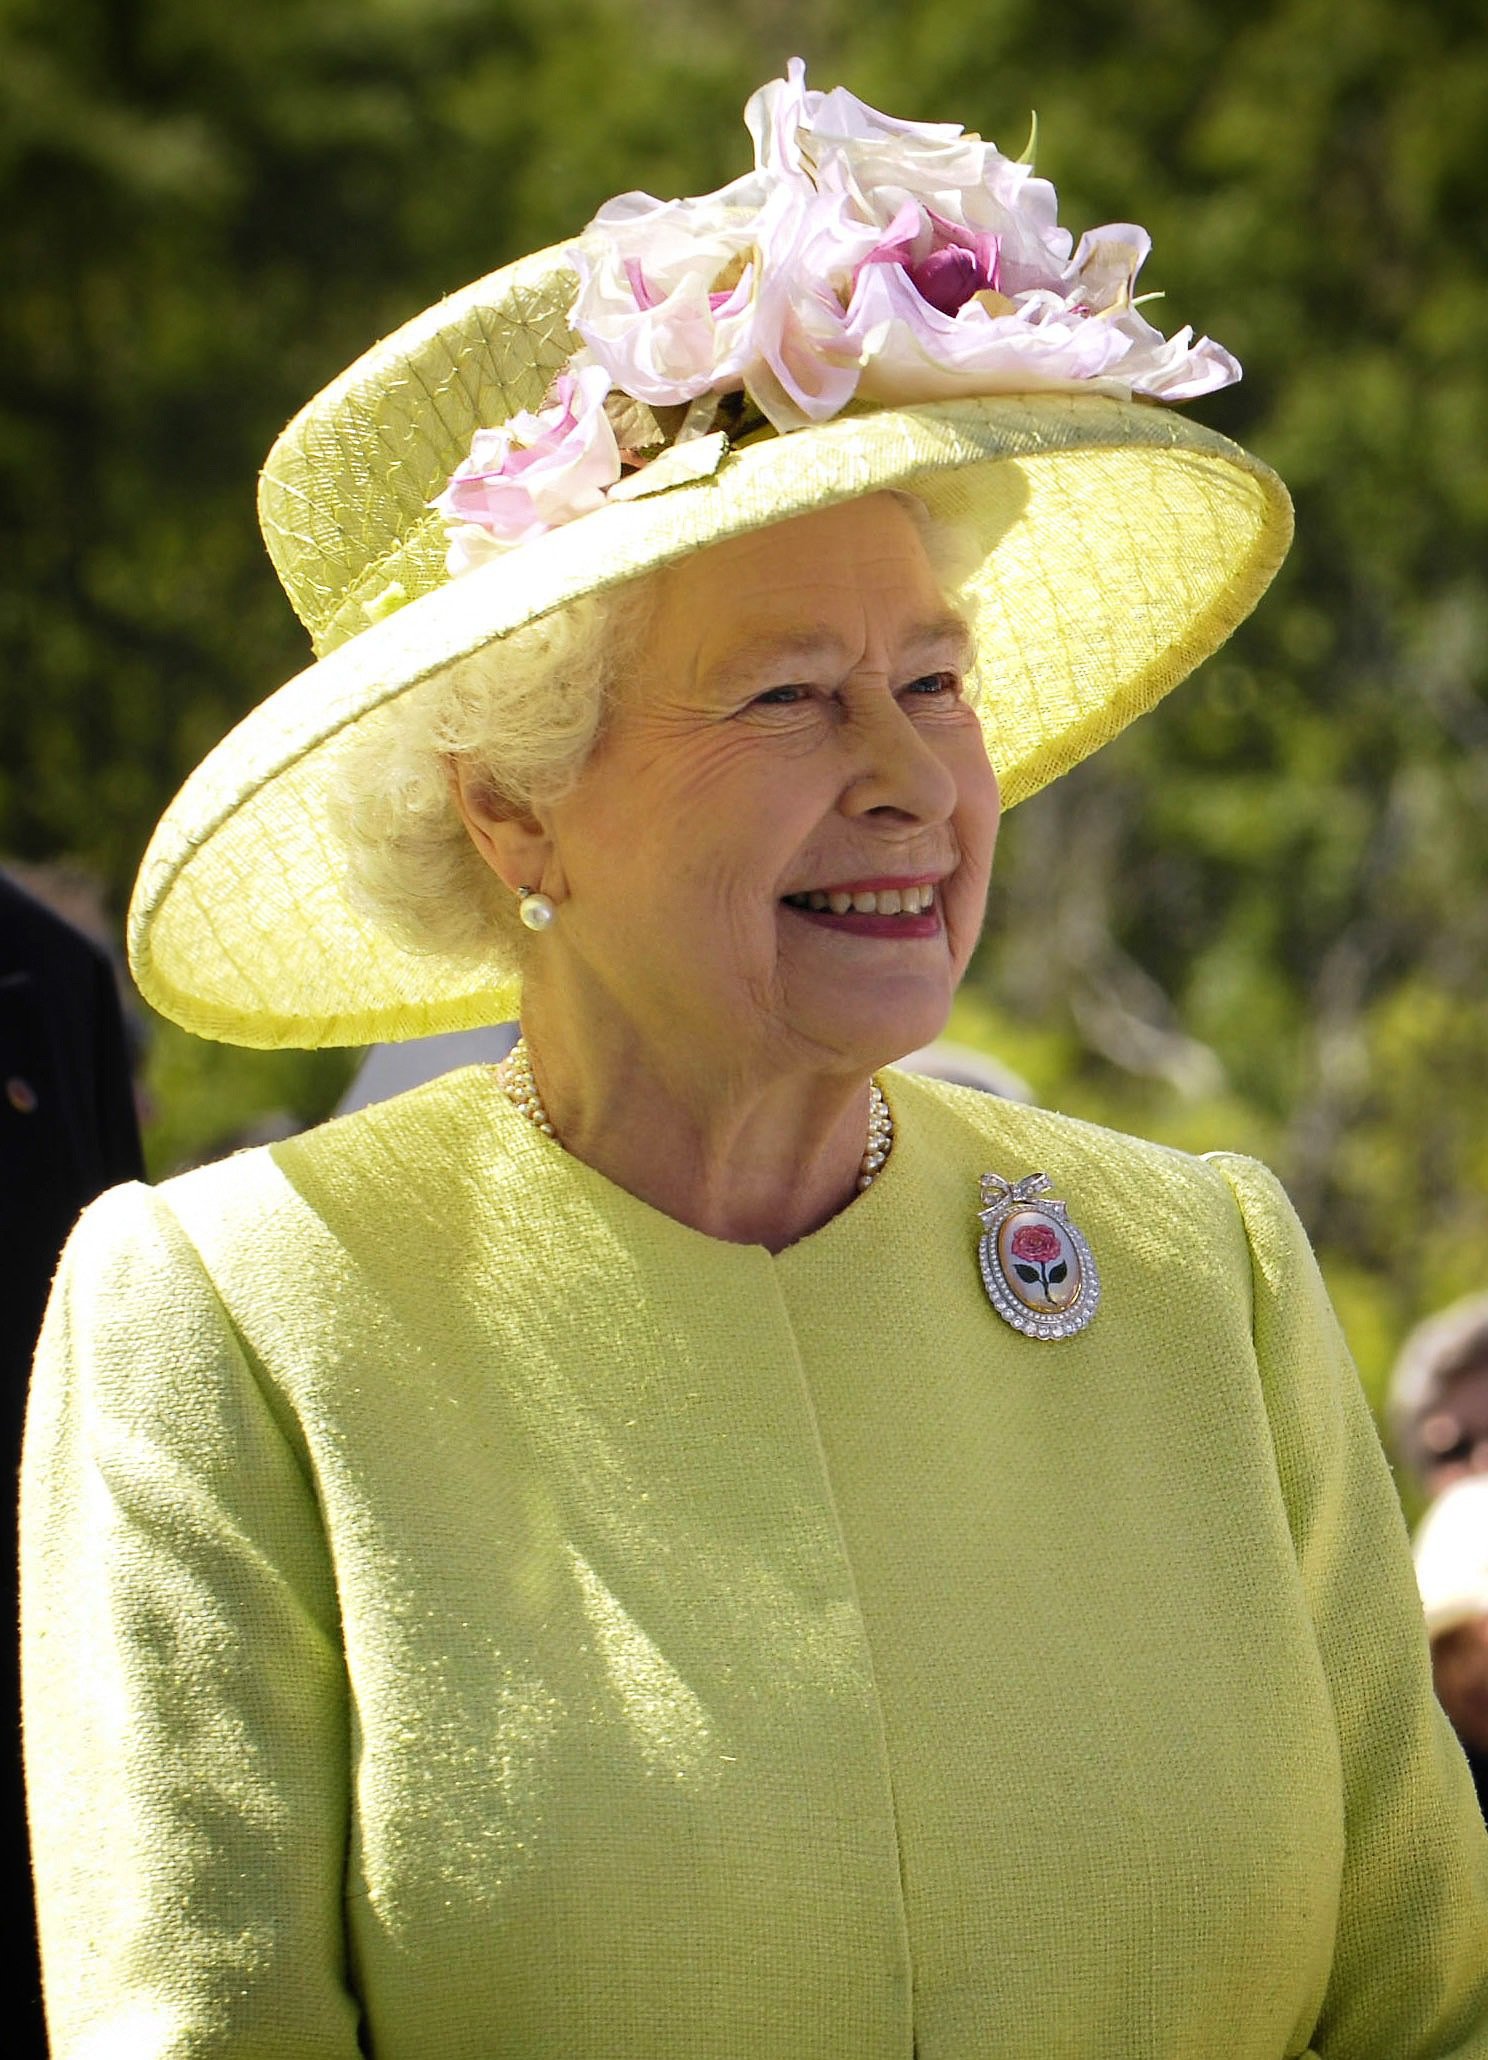 Industry mourns passing of Her Royal Majesty The Queen